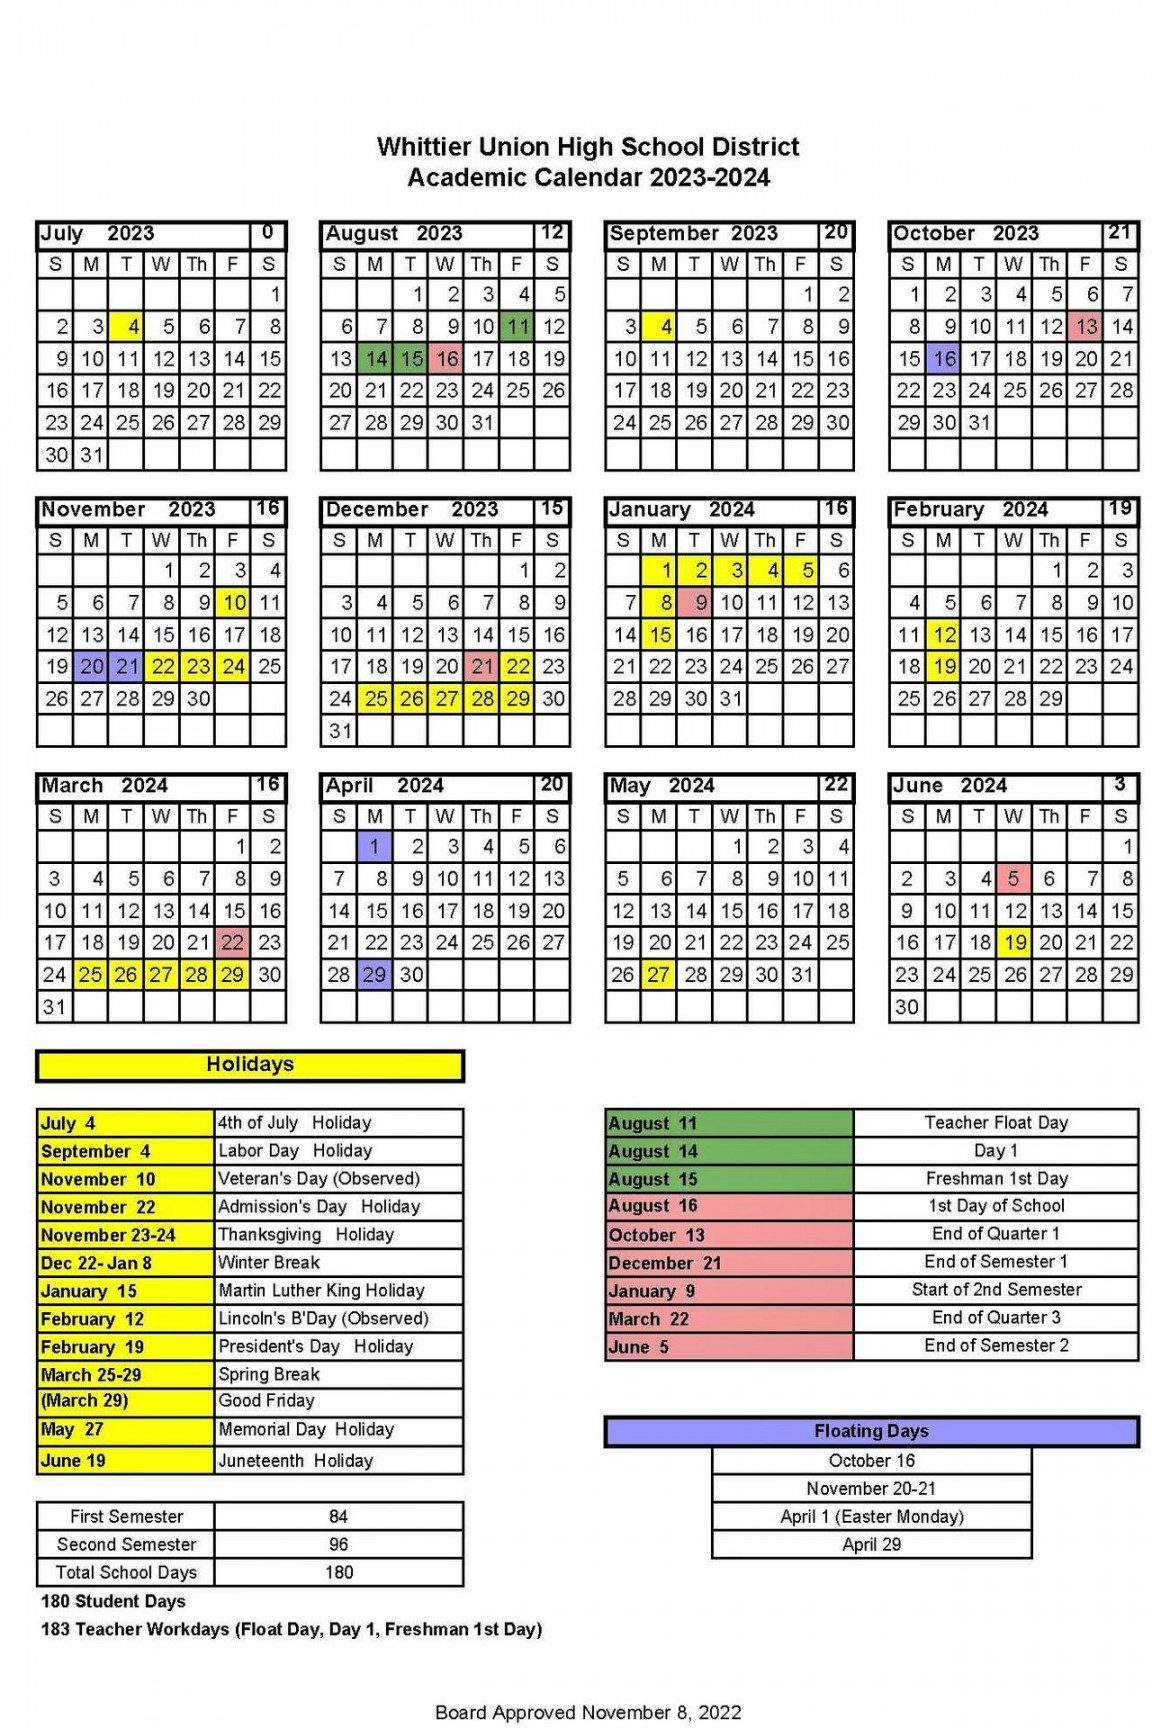 WUHSD Academic Calendars – District Information – Whittier Union